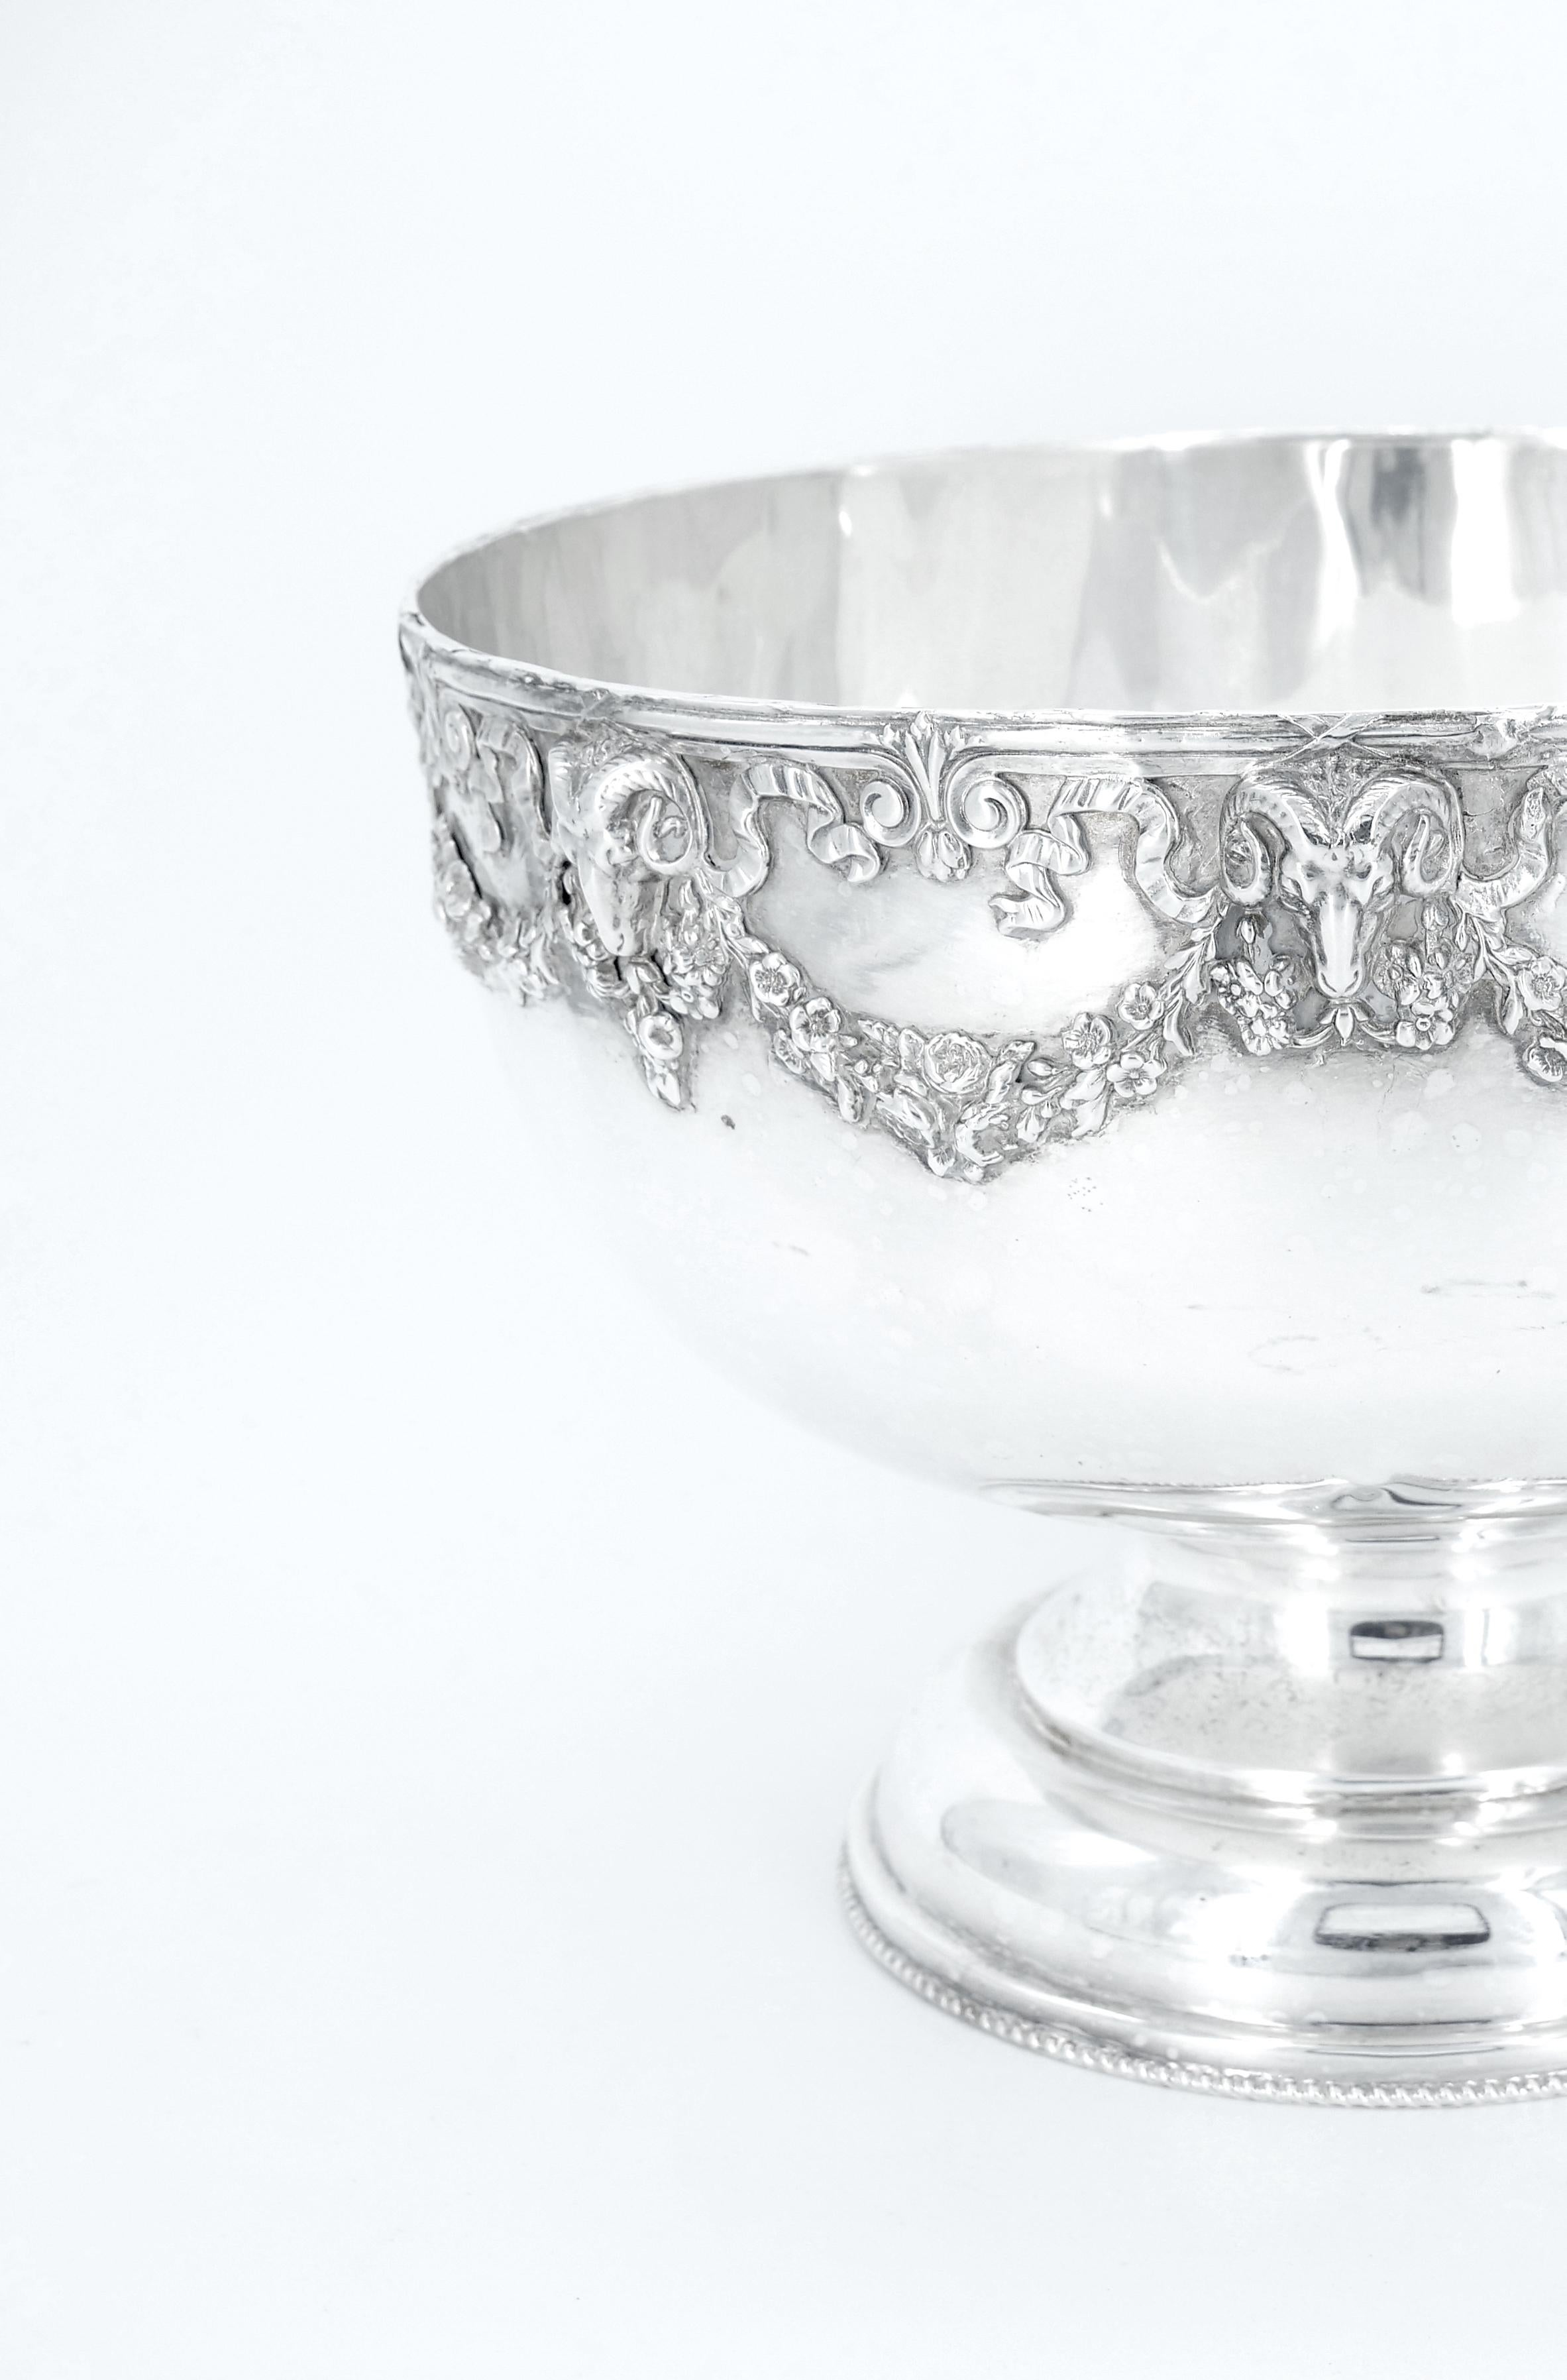 Old EnglishSilver Plate Centerpiece Bowl / Punch Bowl  For Sale 5